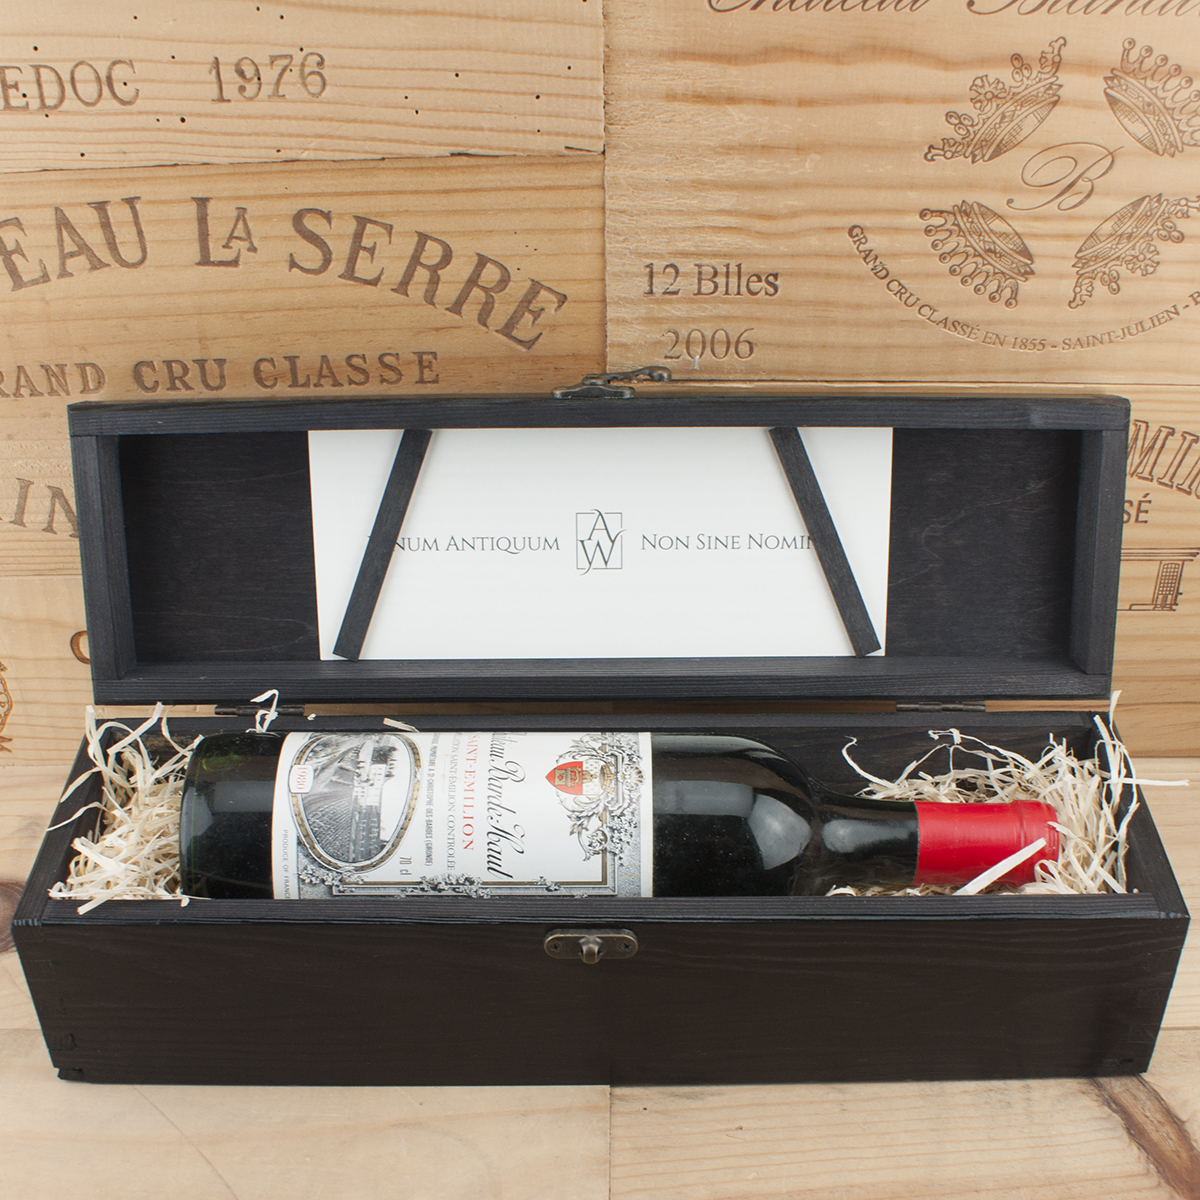 1980 Chateau Barde-Haut in the black box